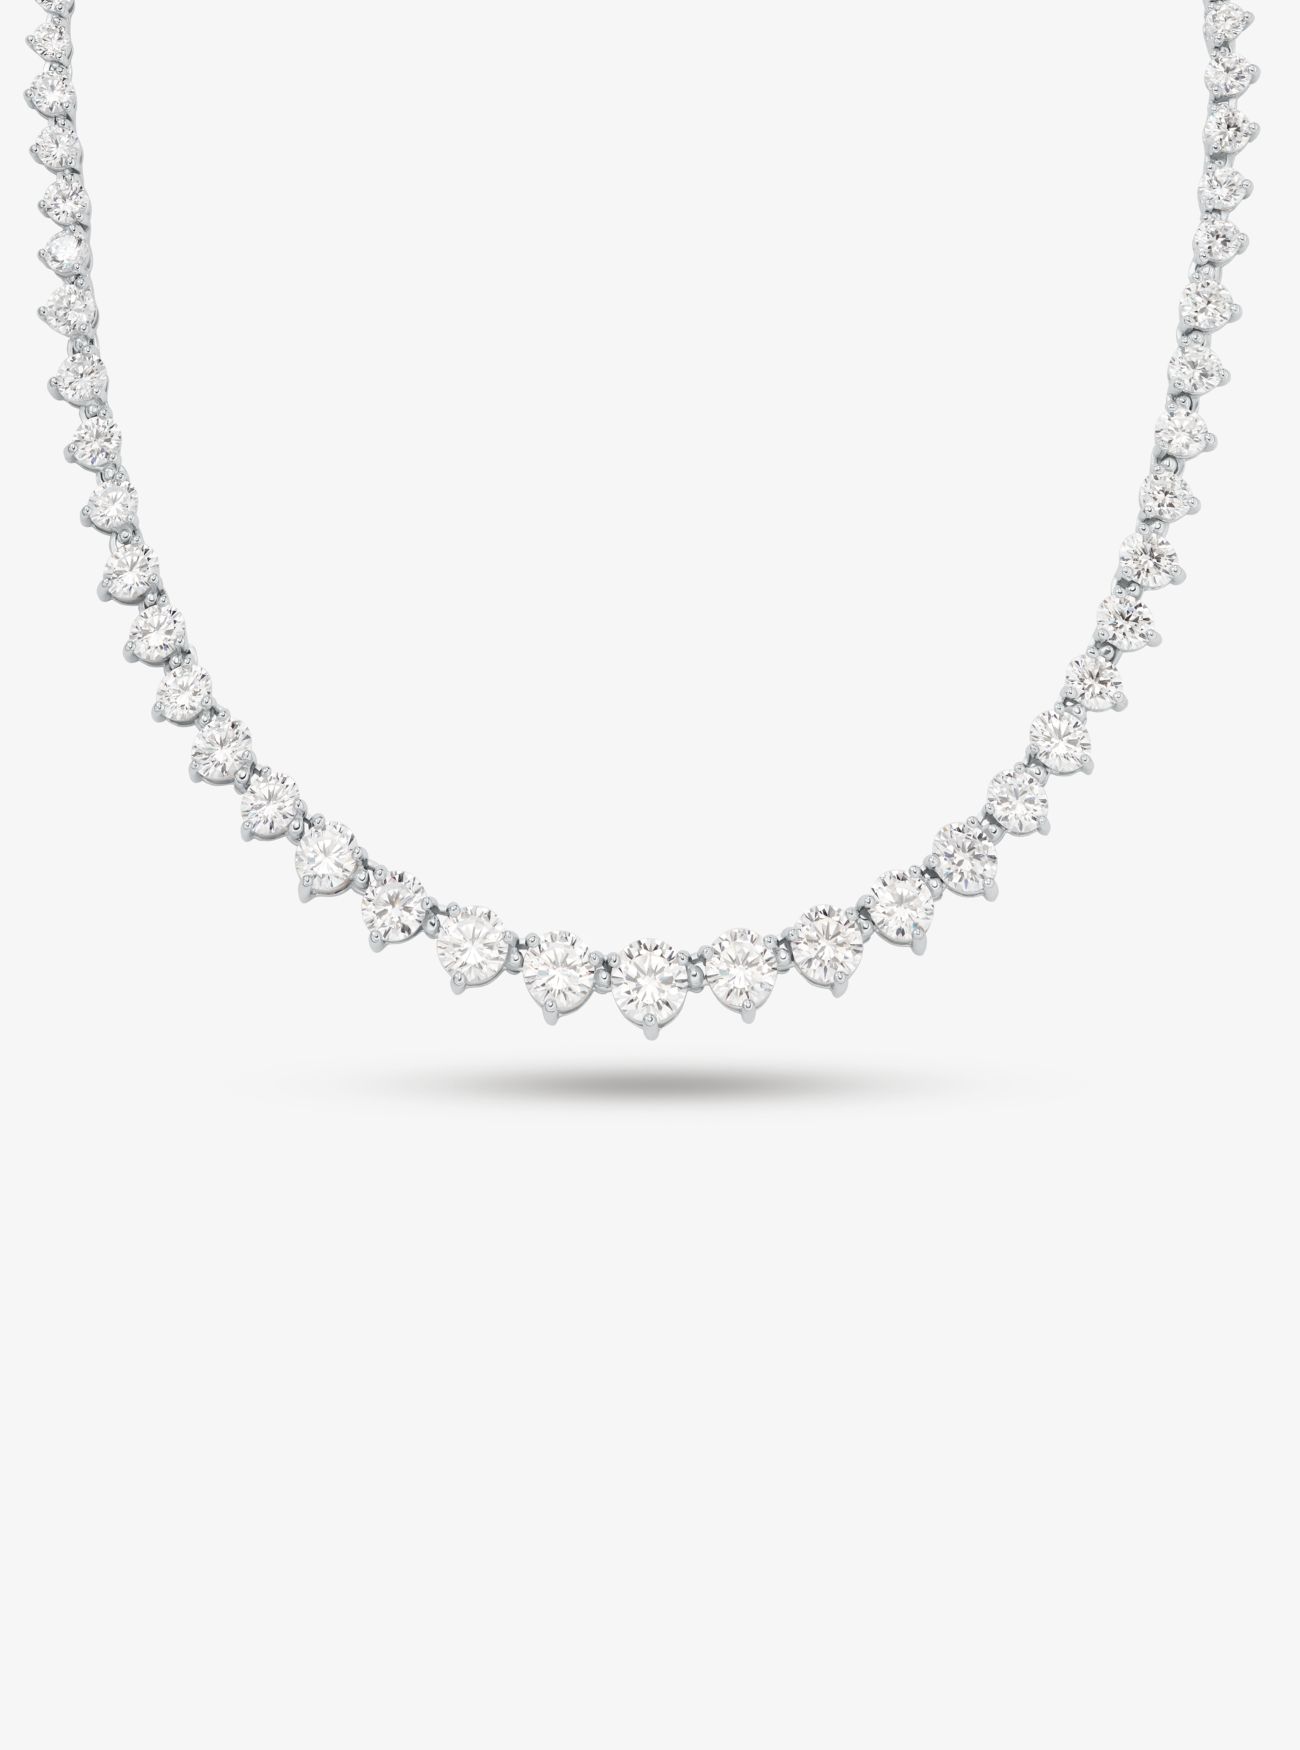 MK Precious Metal-Plated Sterling Silver Cubic Zirconia Necklace - Silver - Michael Kors